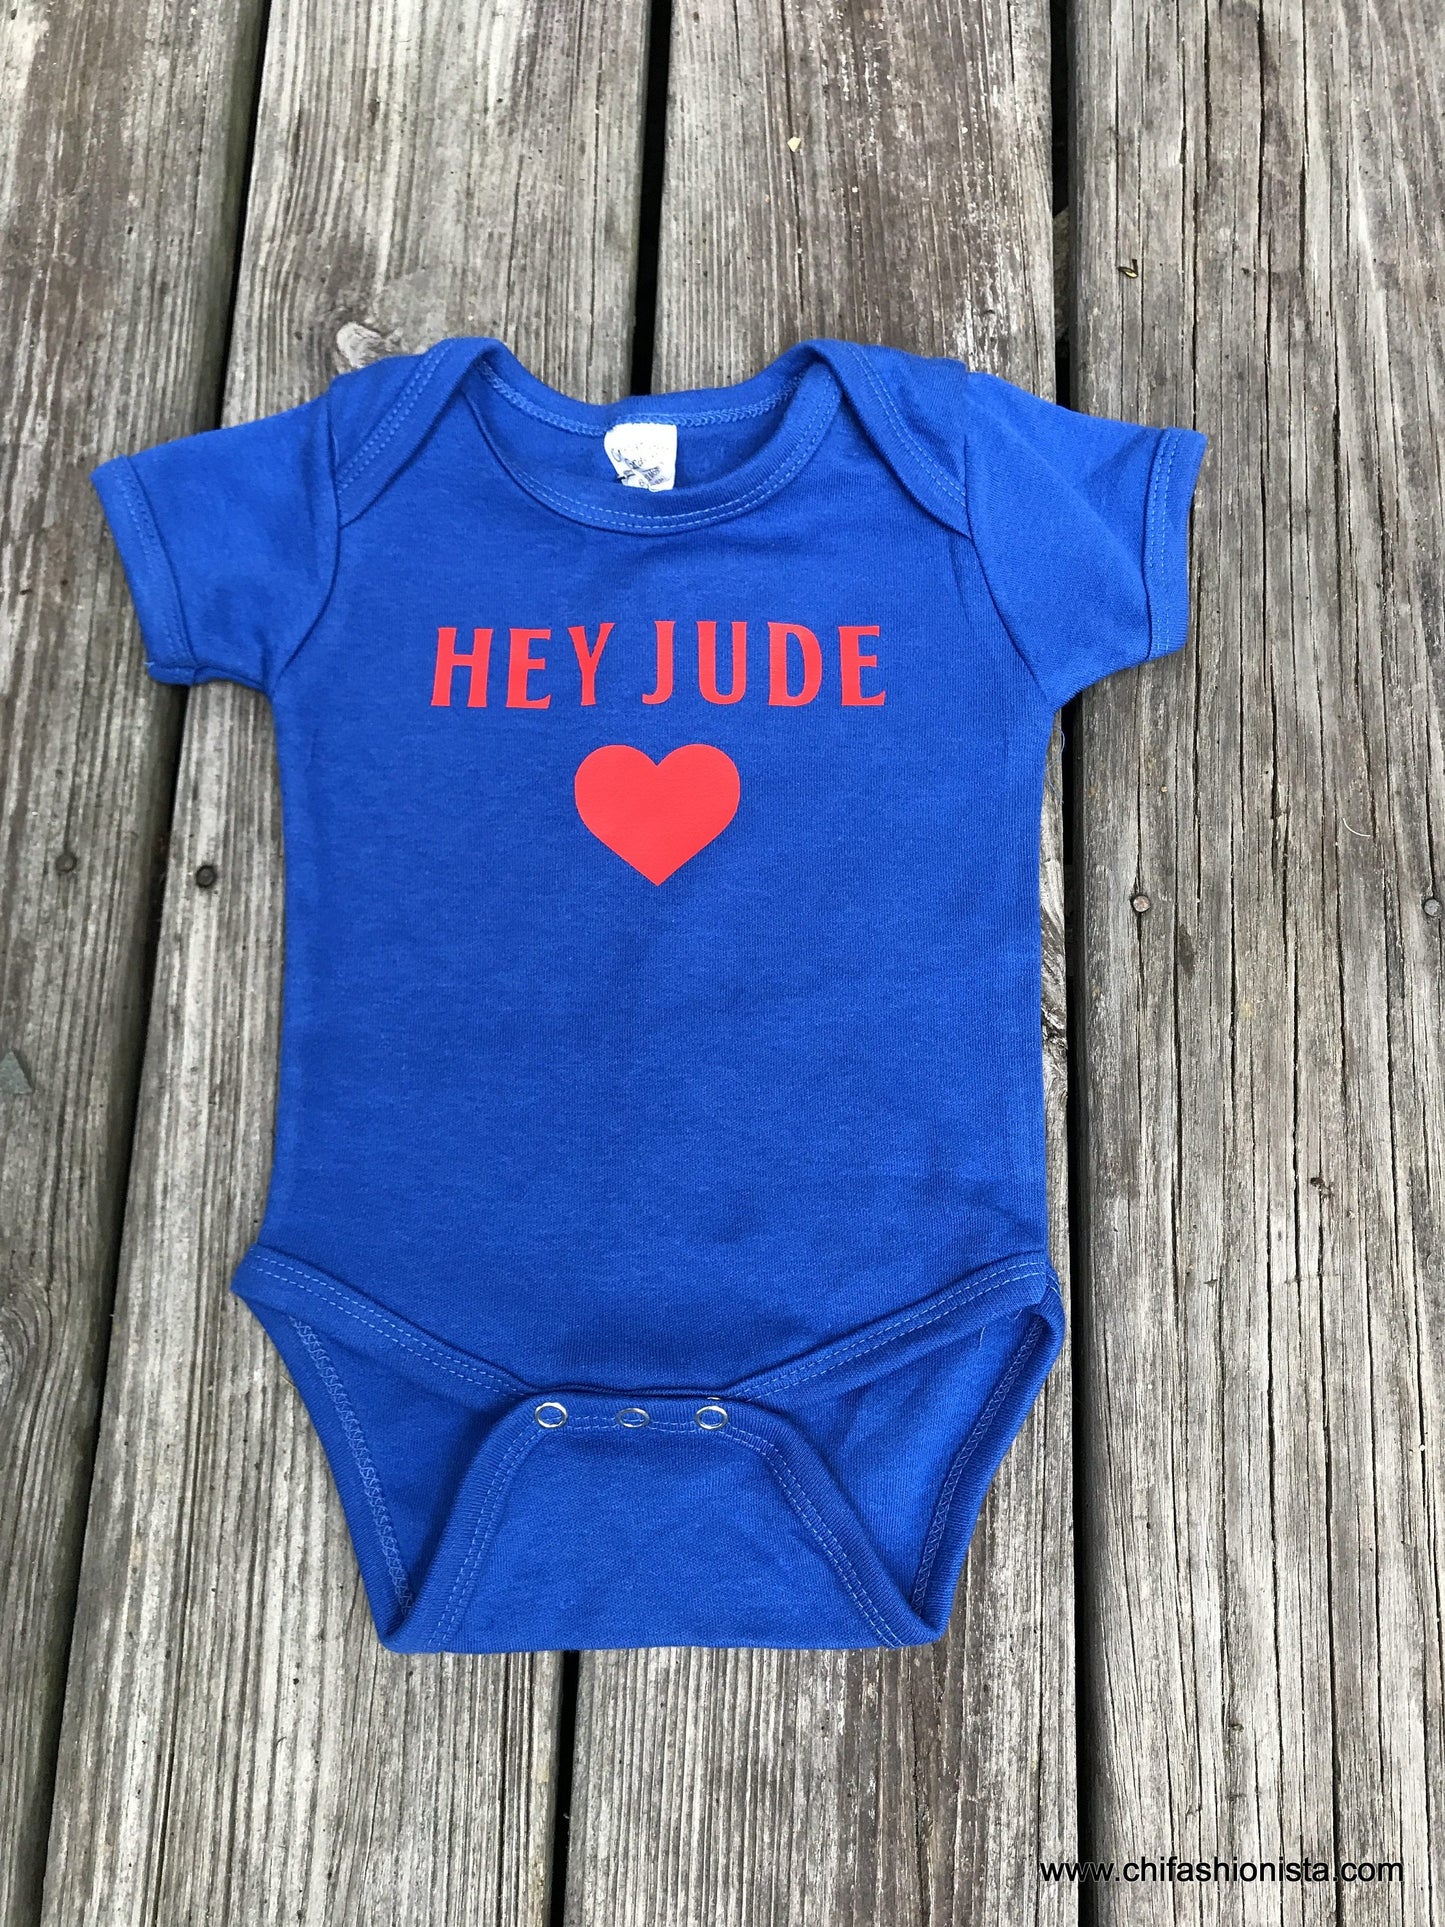 Handcrafted Children's Clothing, Clothing for Children and Parents, Hey Jude Shirt, chi-fashionista